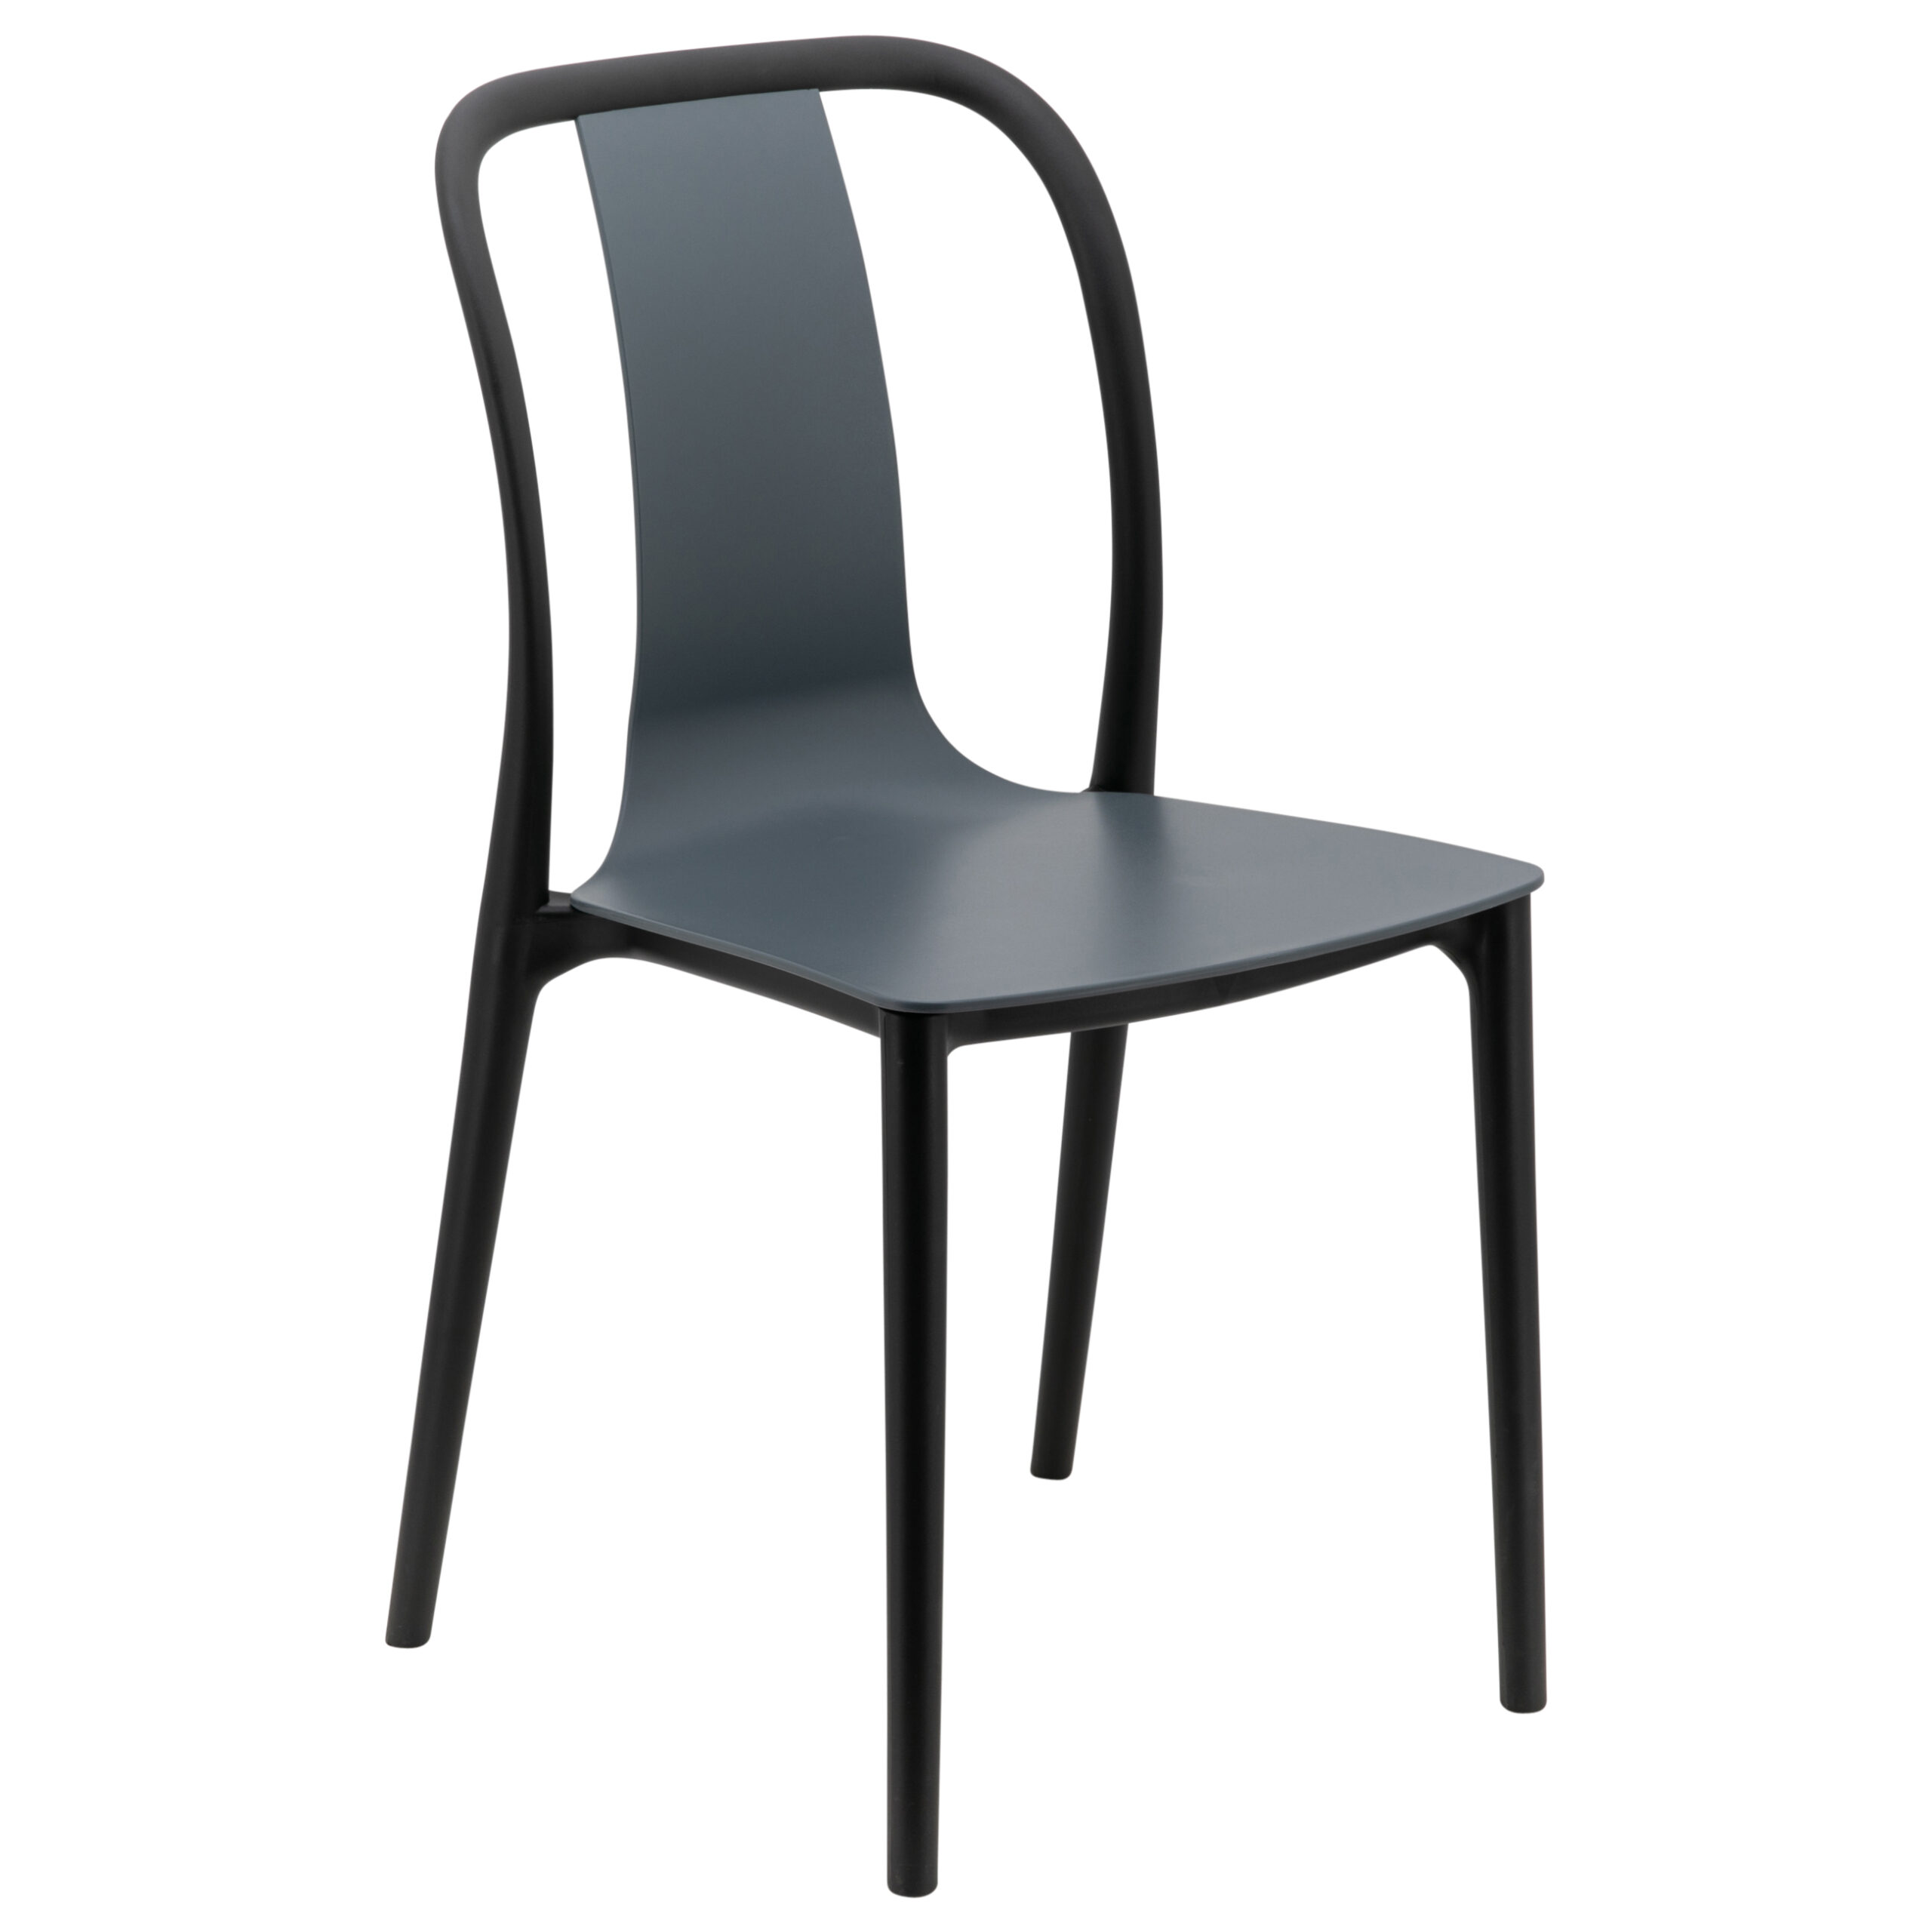 Emma Chair in Black and Charcoal